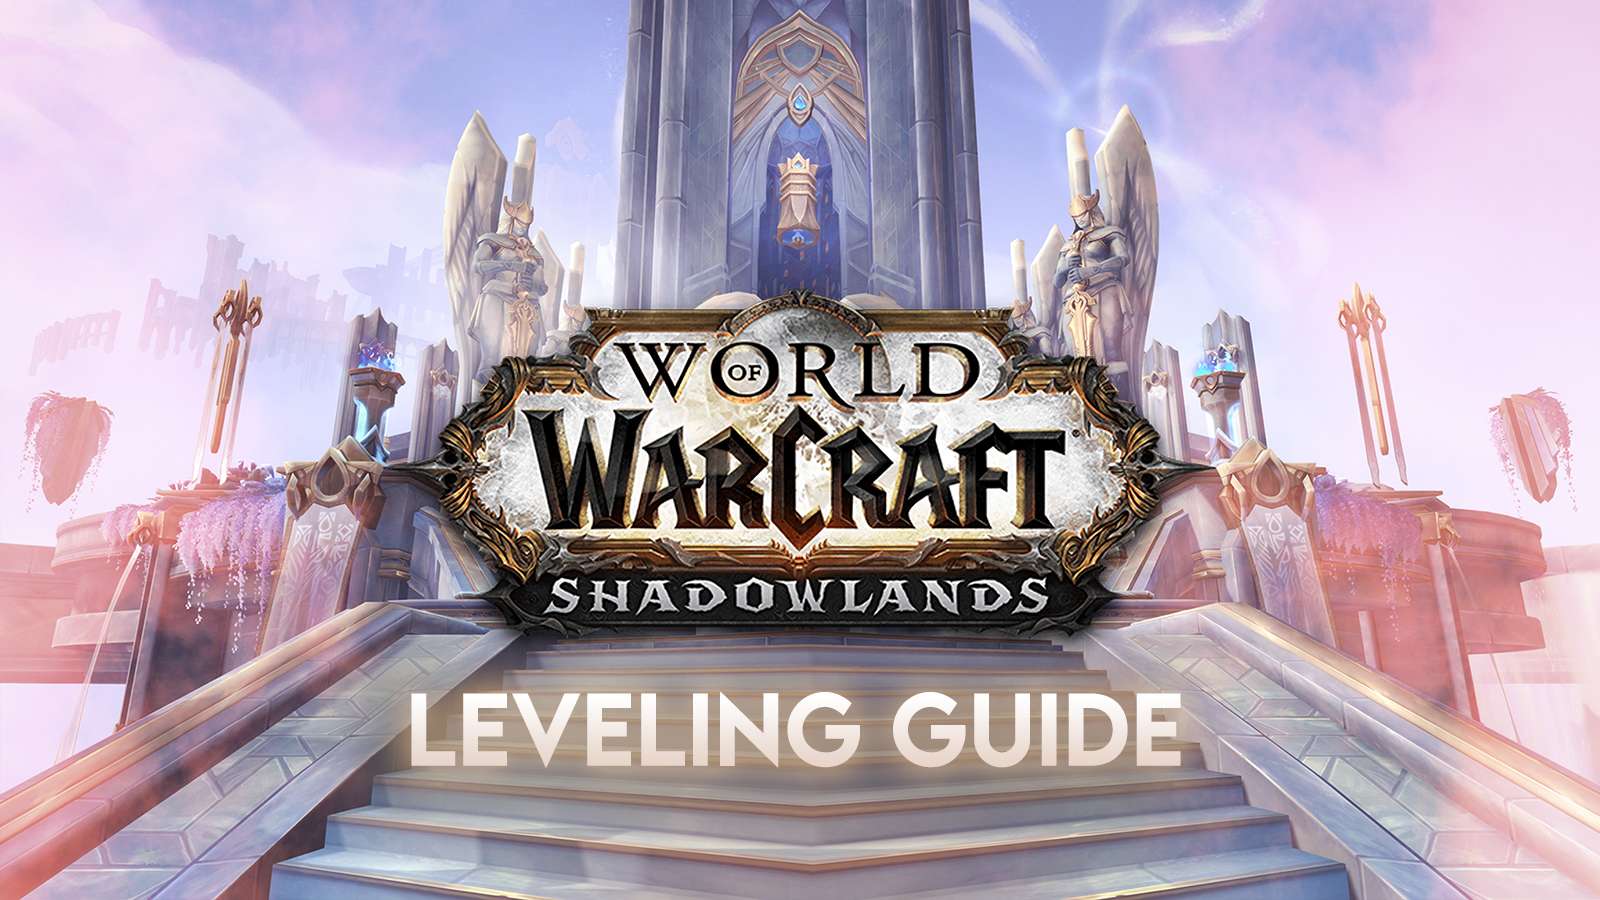 WoW Level Guide featuring Bastion